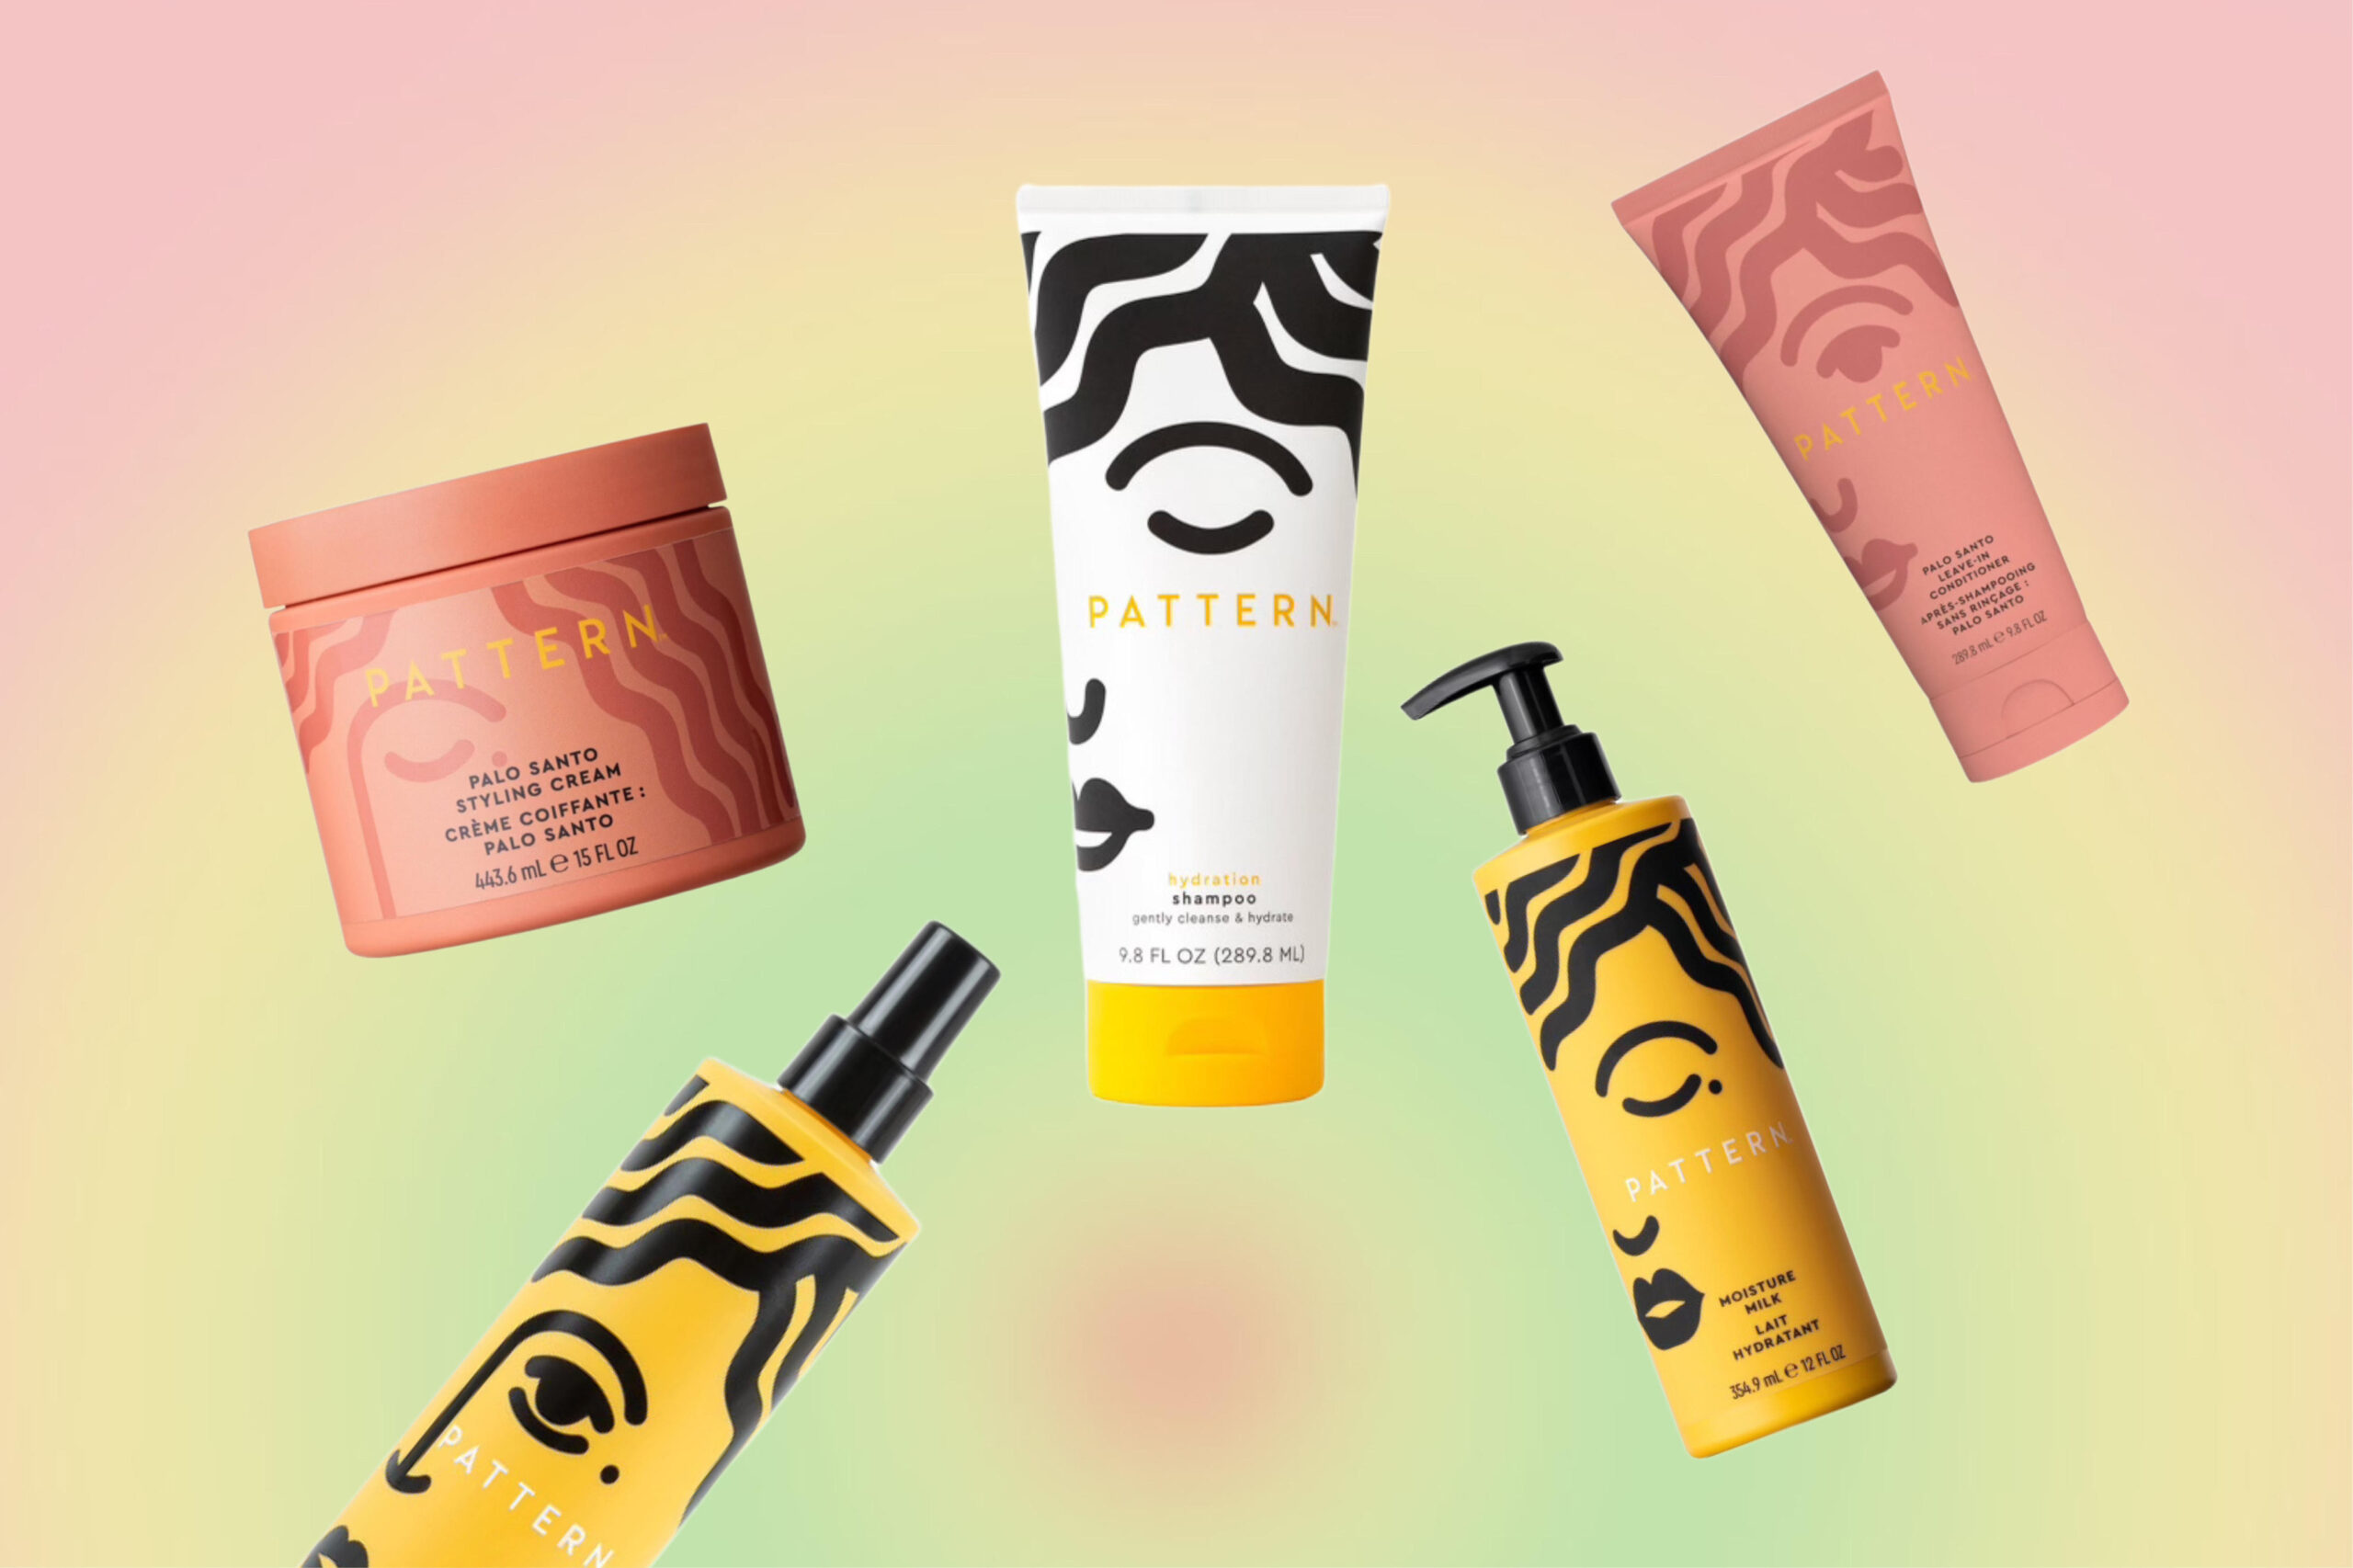 5 PATTERN BEAUTY HAIR PRODUCTS EVERY CURLY HAIR WOMAN NEEDS TO TRY